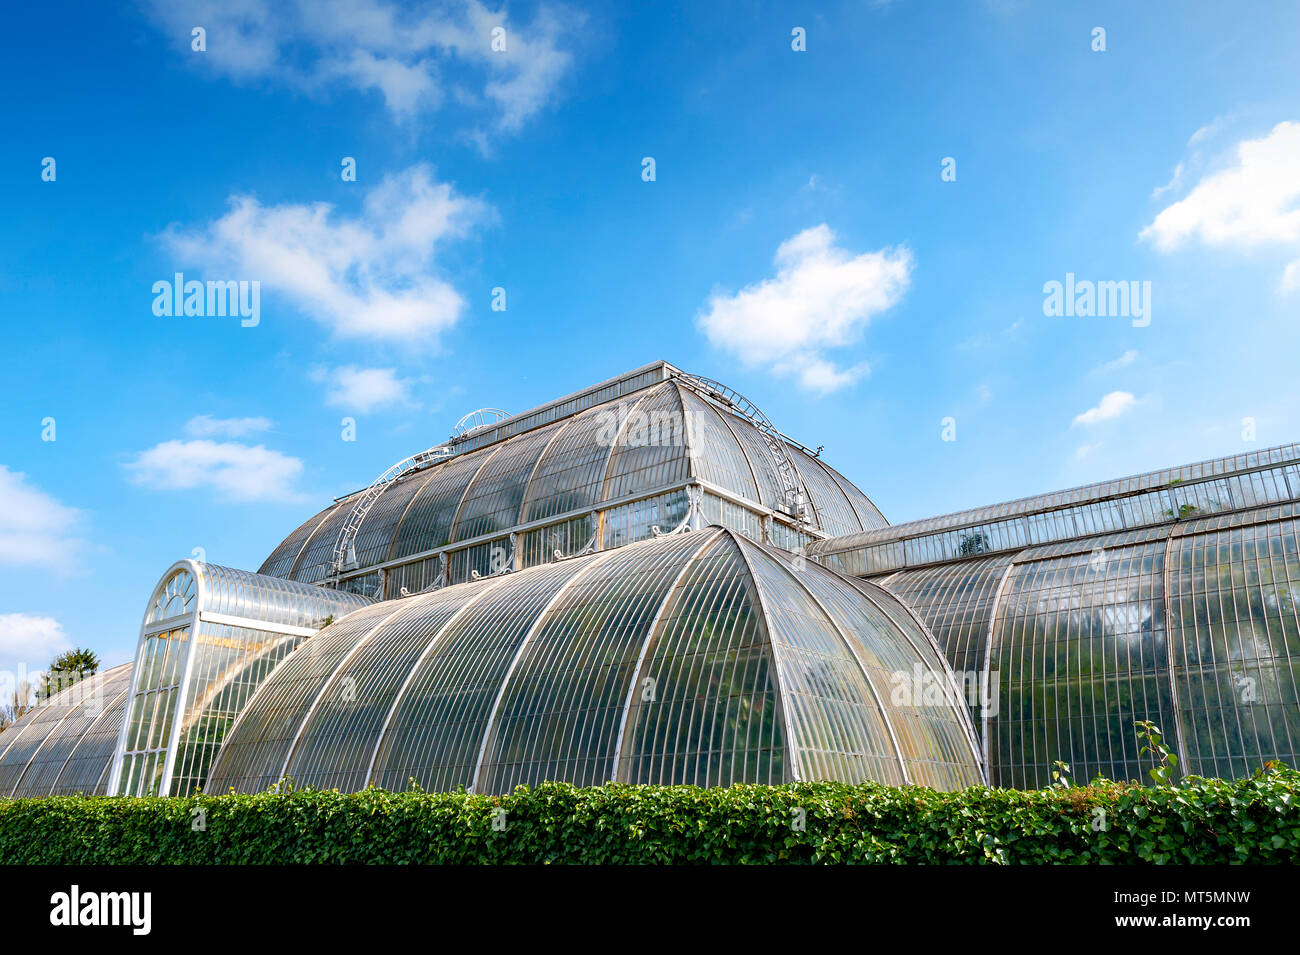 London, UK - April 2018: Palm House, an iconic Victorian glasshouse recreating a rainforest climate for tropical plants at Kew Garden, England Stock Photo